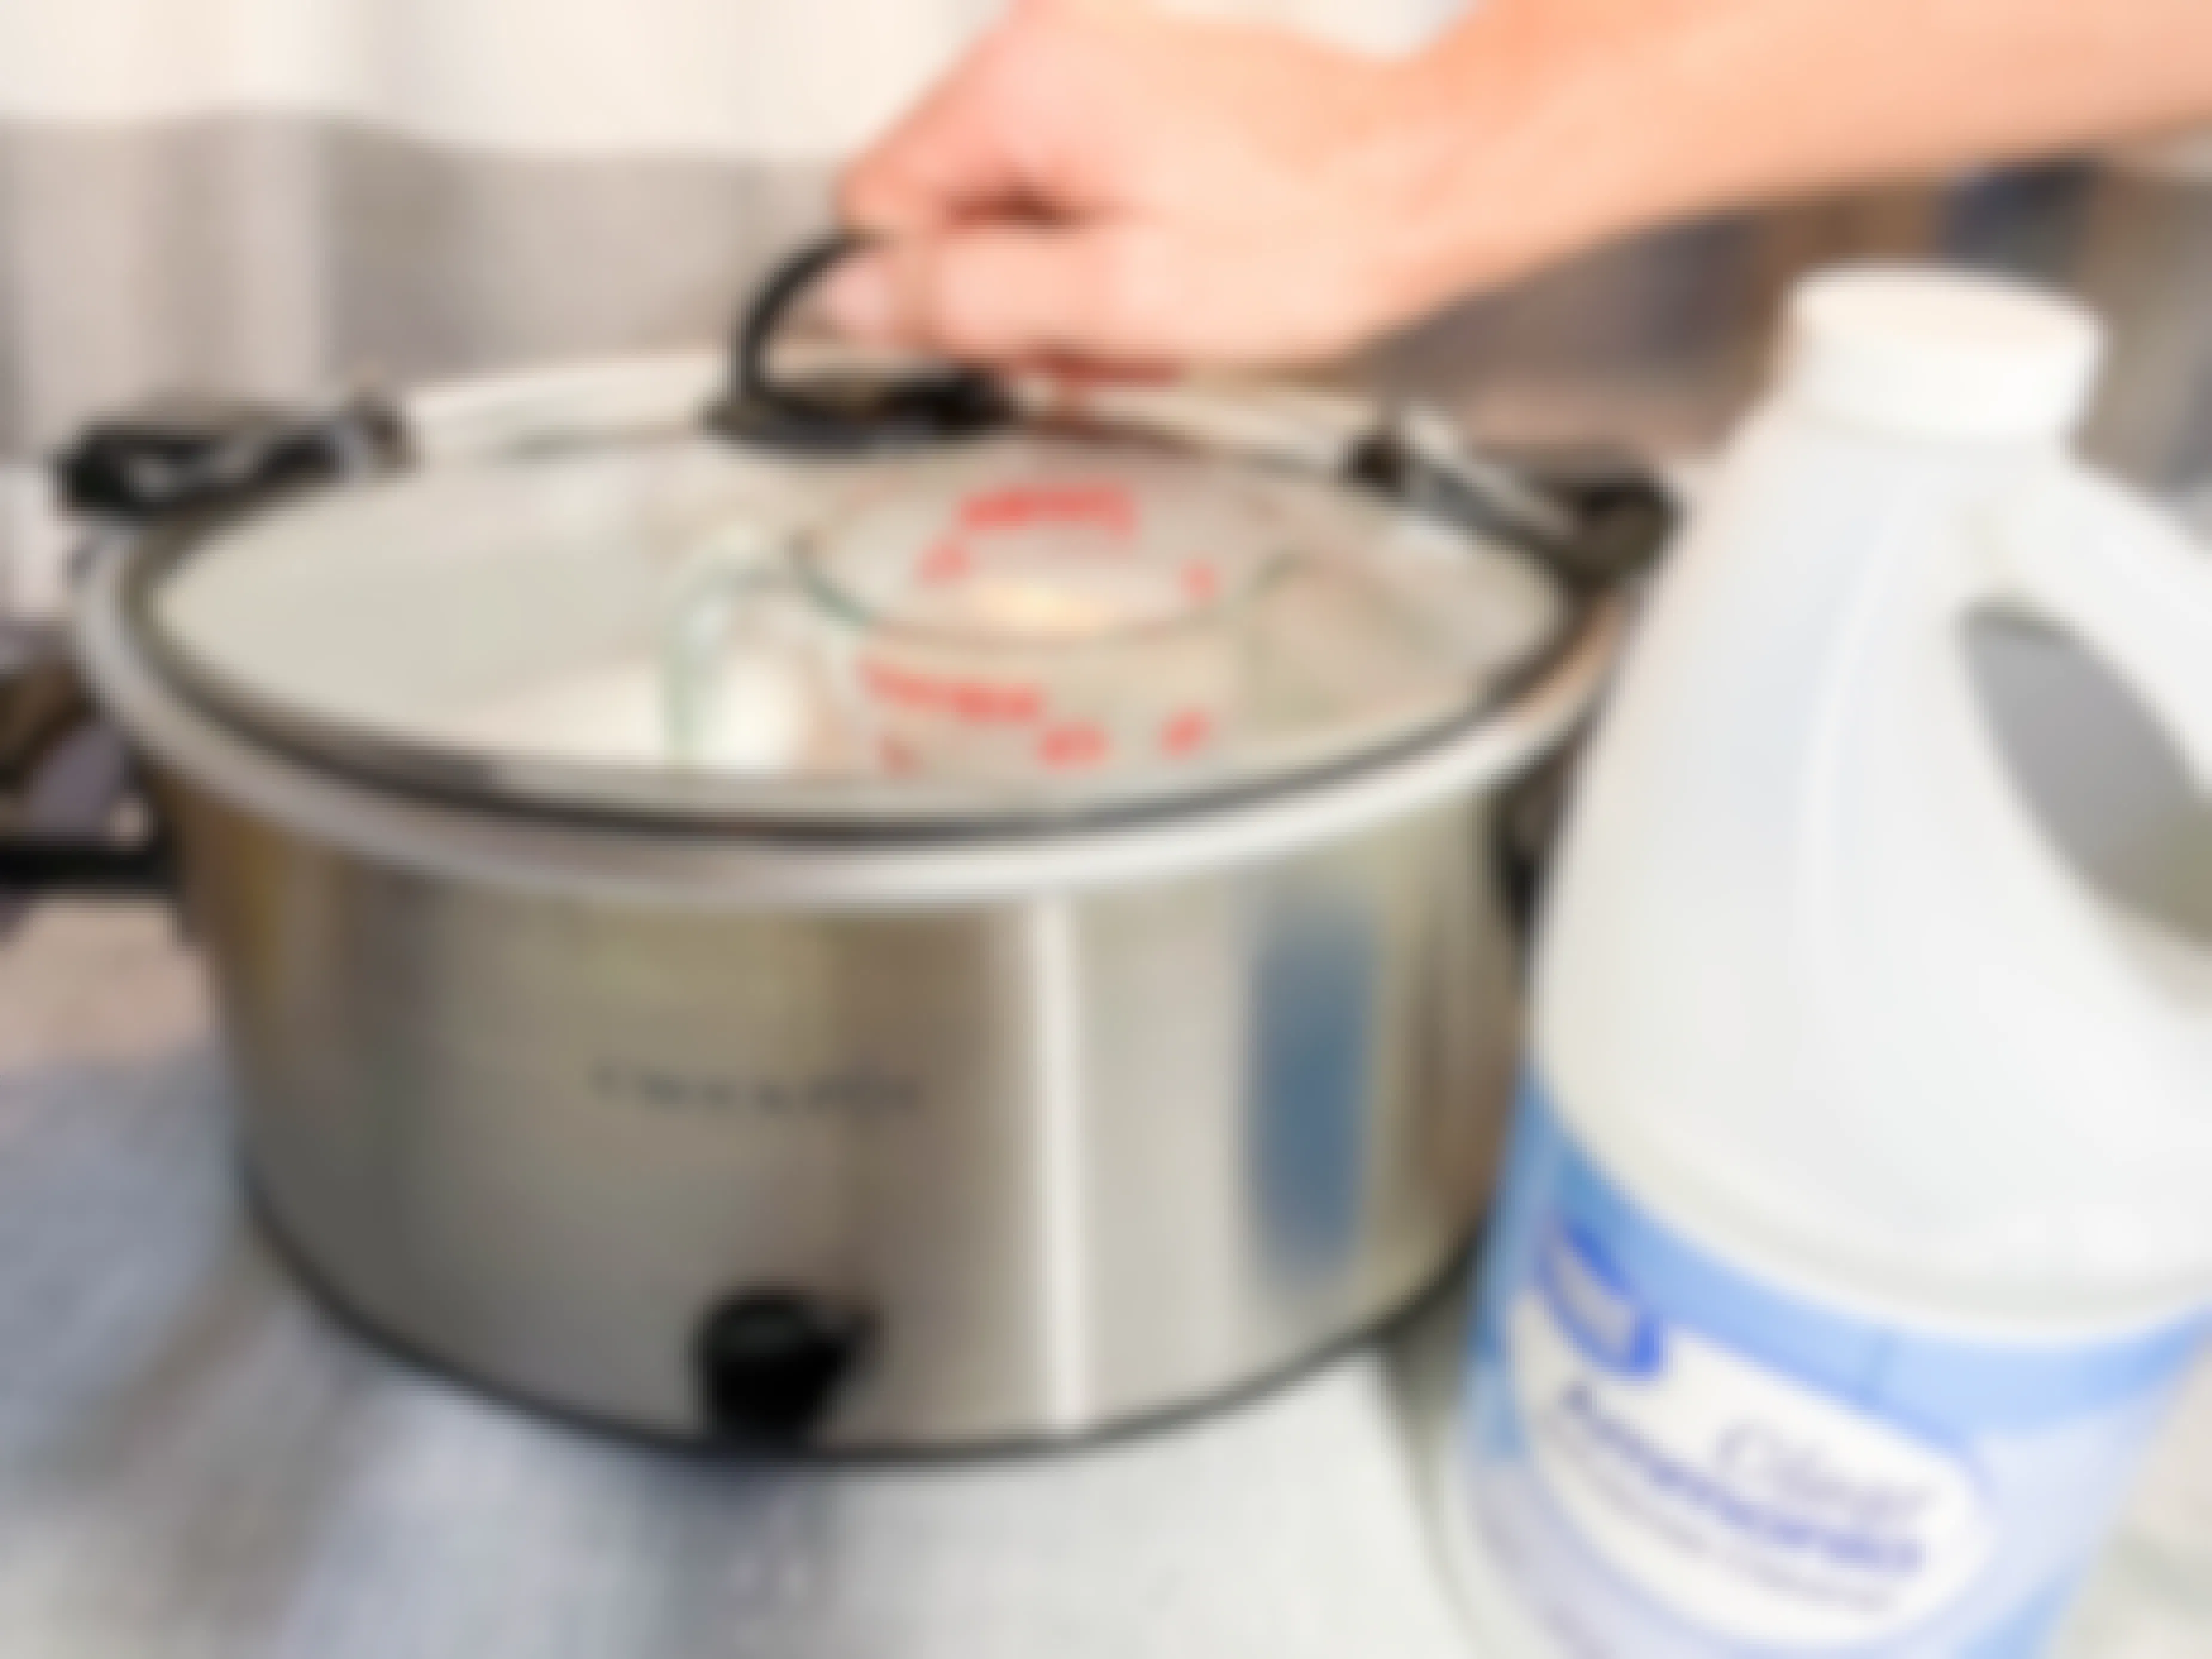 ammonia being poured into crock pot